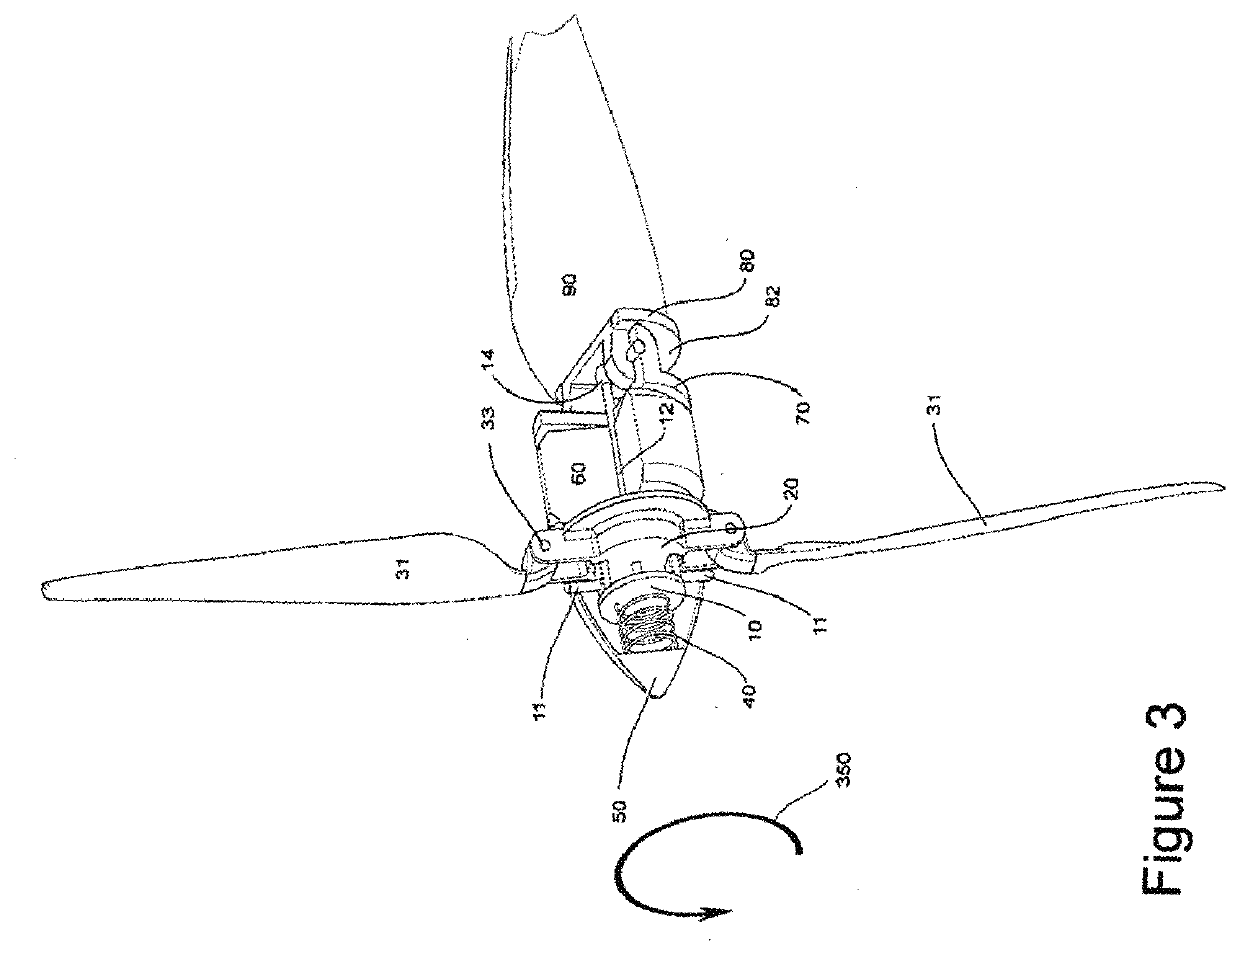 Propeller-Hub Assembly With Folding Blades For VTOL Aircraft